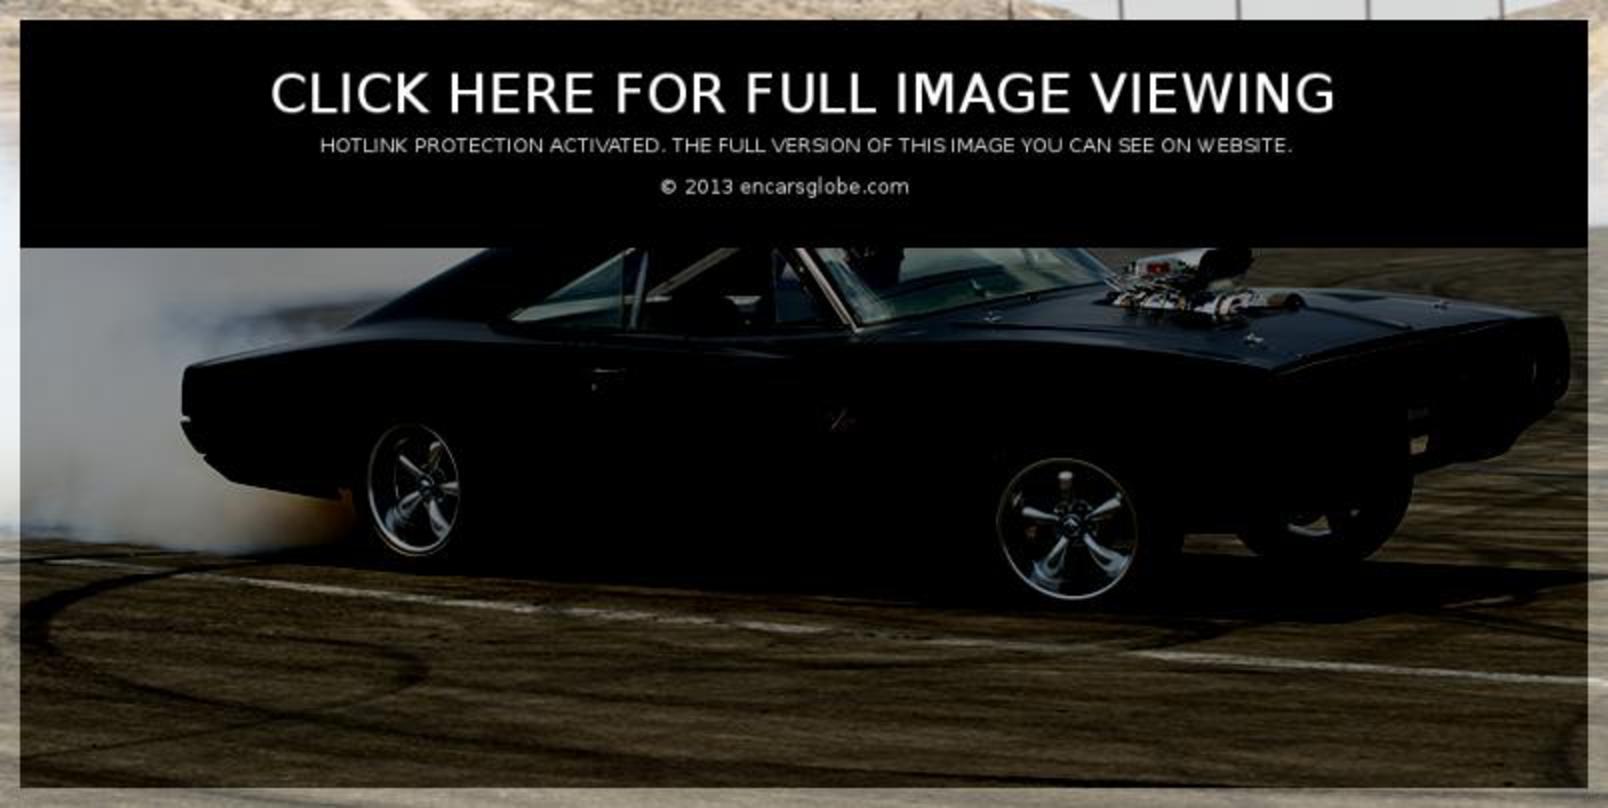 Dodge Charger R/T (01 image) Size: 804 x 404 px | 52731 views